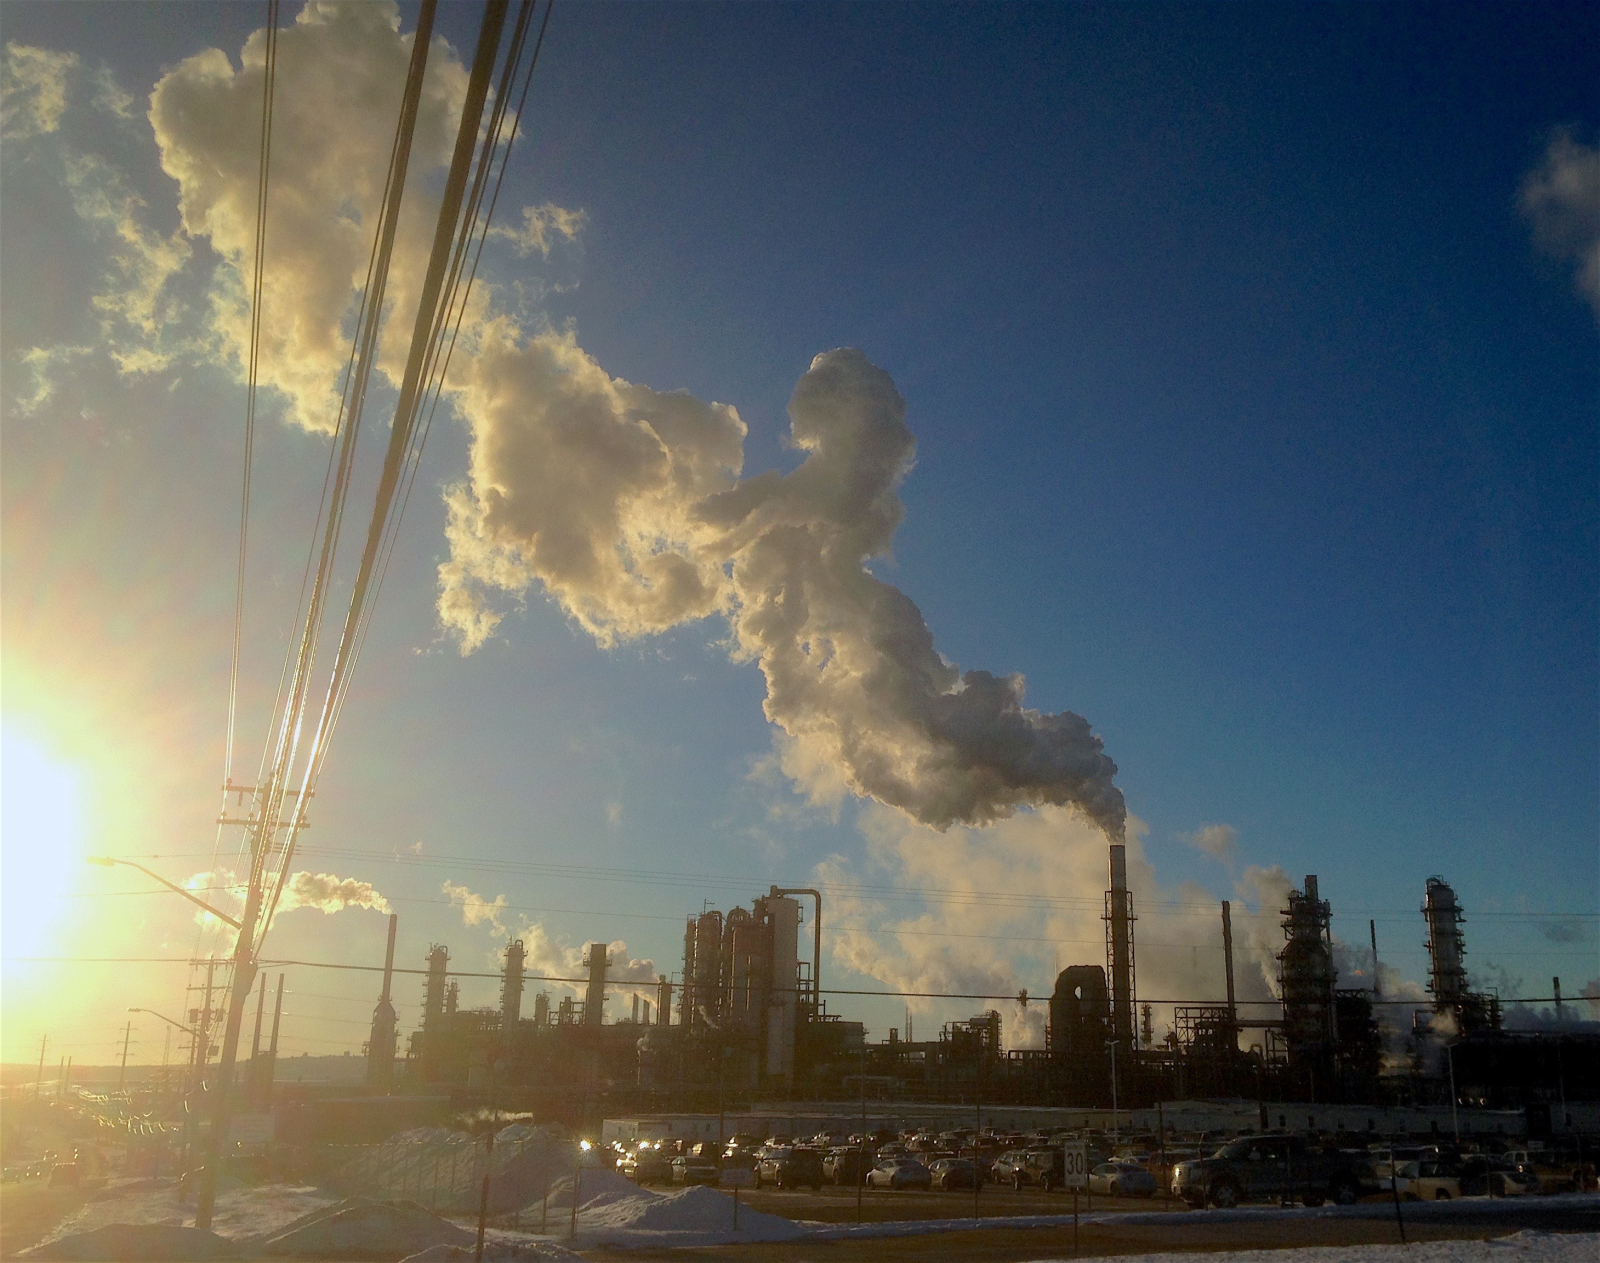 Irving Oil, refinery, plume, pollution, Irvings